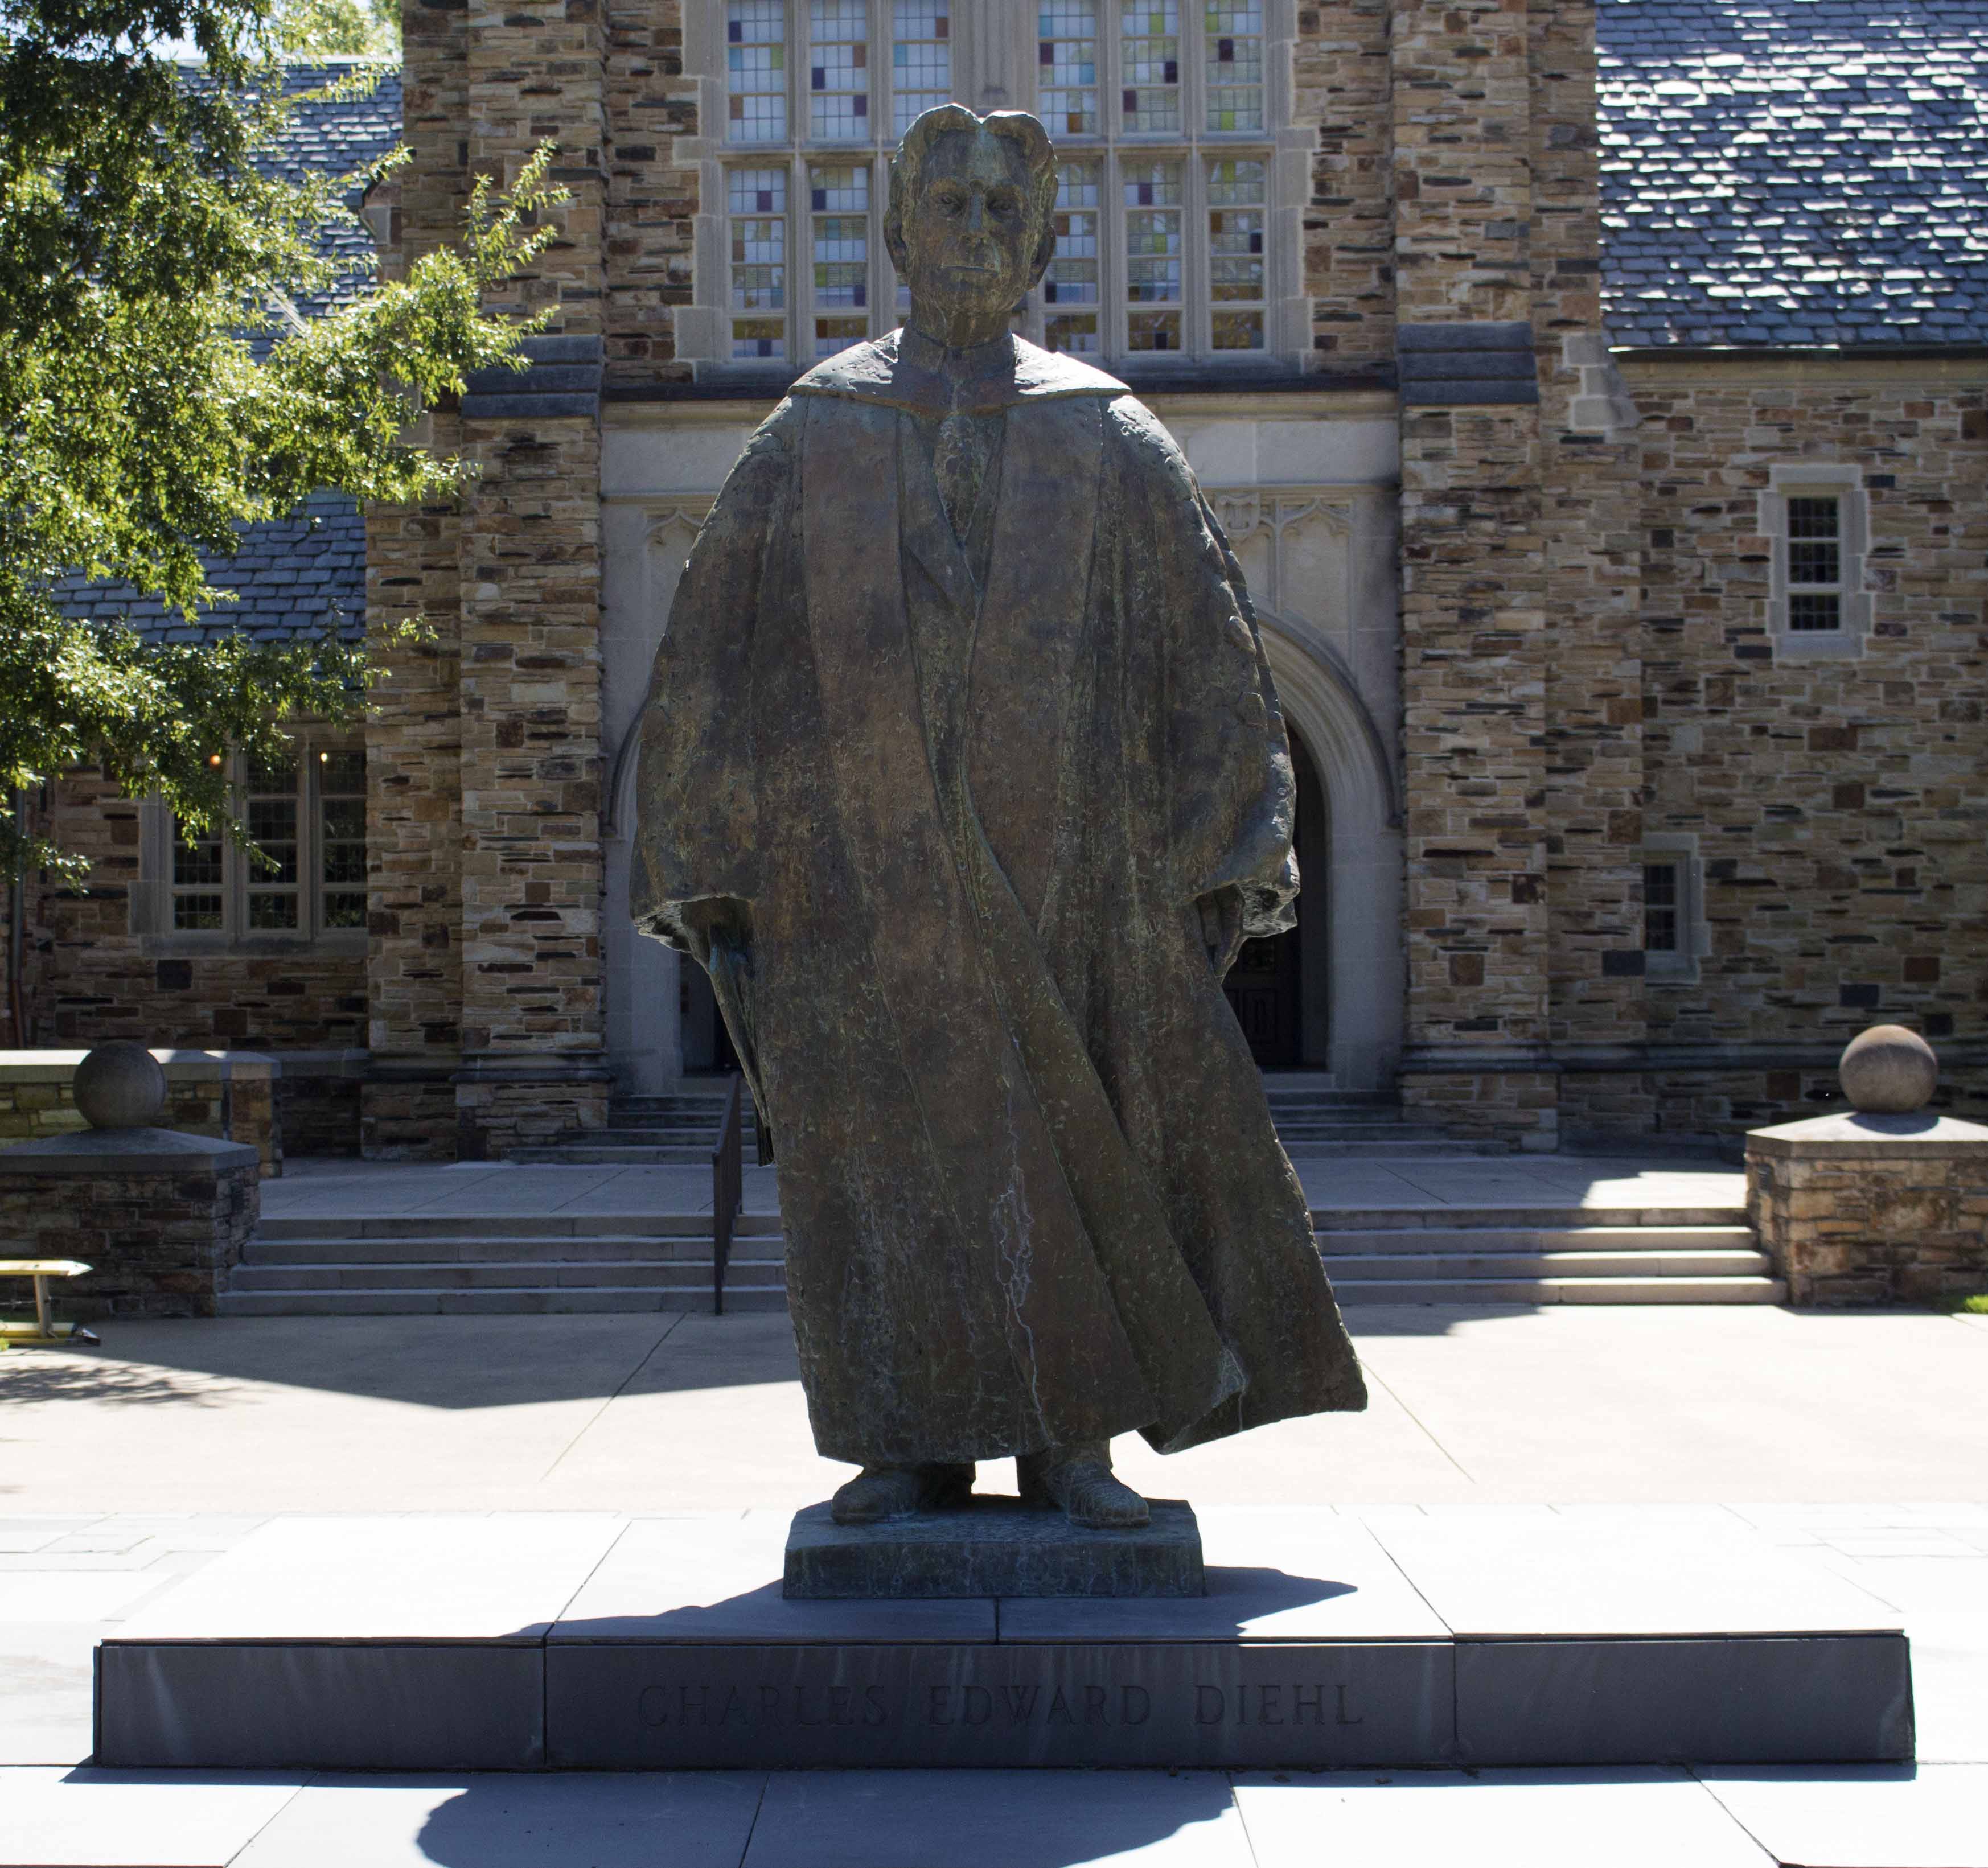 This is a large outdoor sculpture of Charles Edward Diehl wearing regalia and holding something in his right hand. 